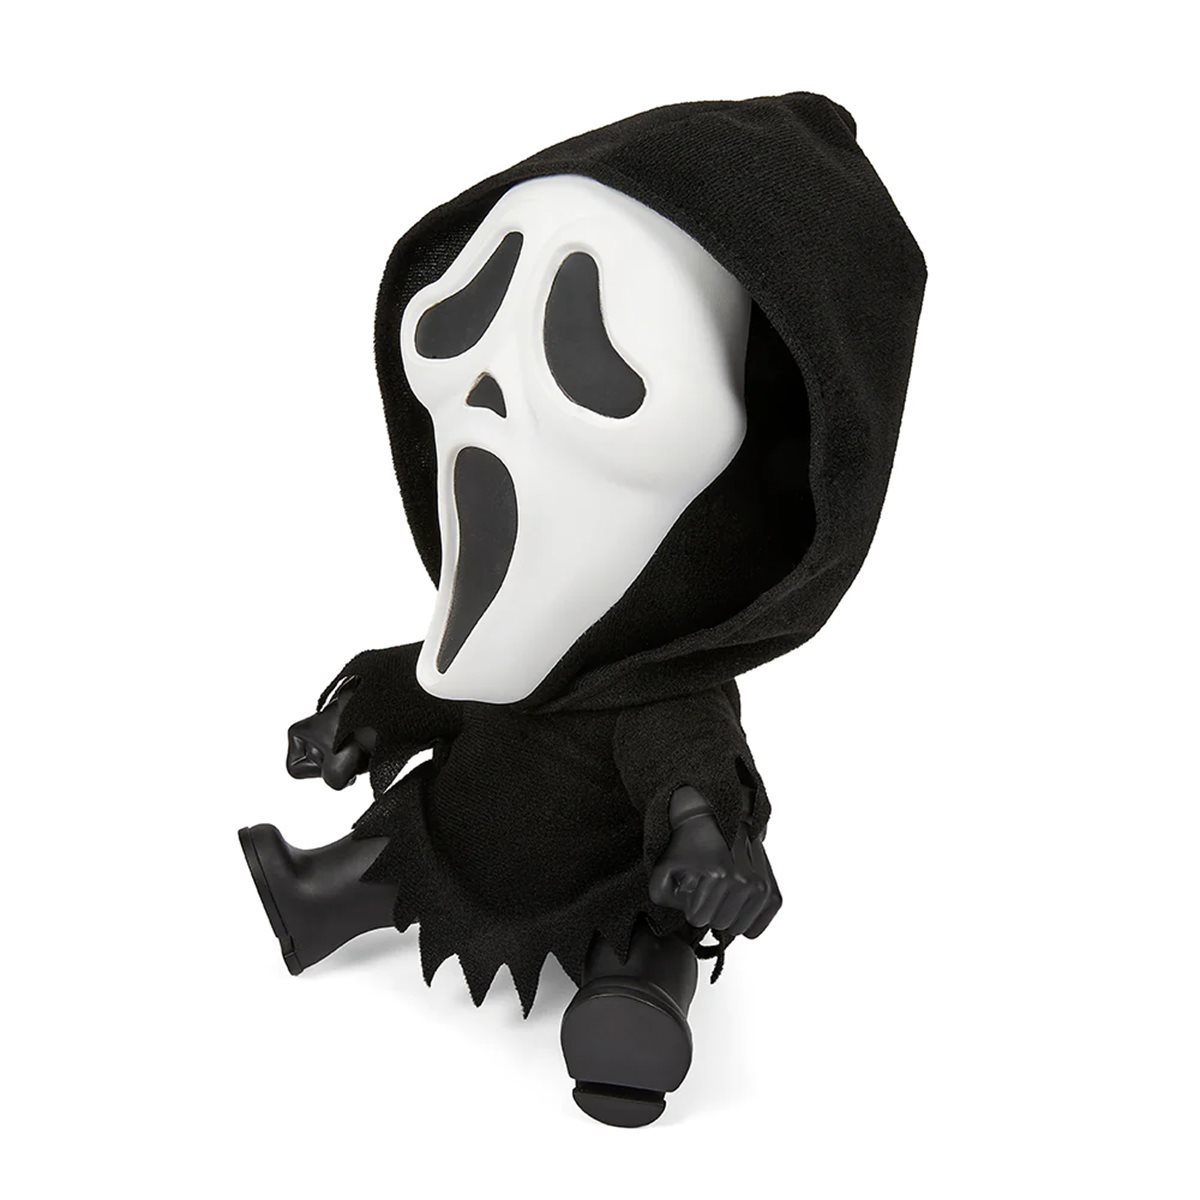 Ghost Face 16 Shake Action Plush by Kidrobot